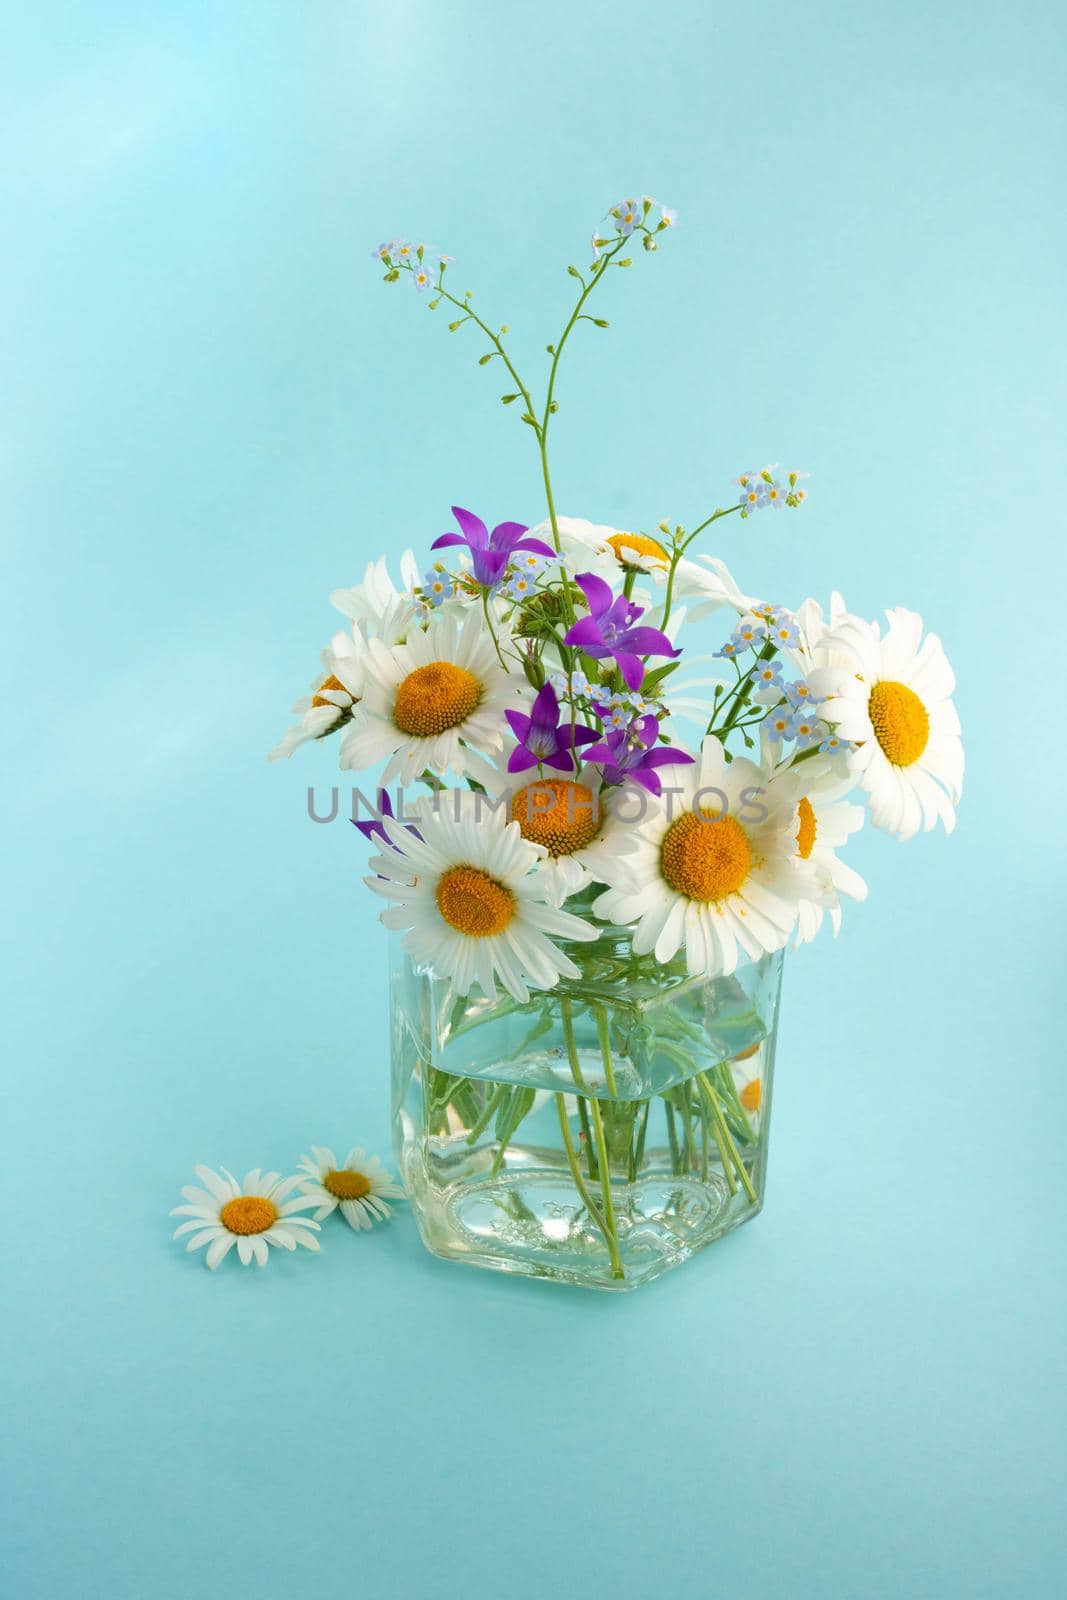 Chamomile, bluebells and forget-me-nots.Bouquet in a glass jar on a blue background by lapushka62